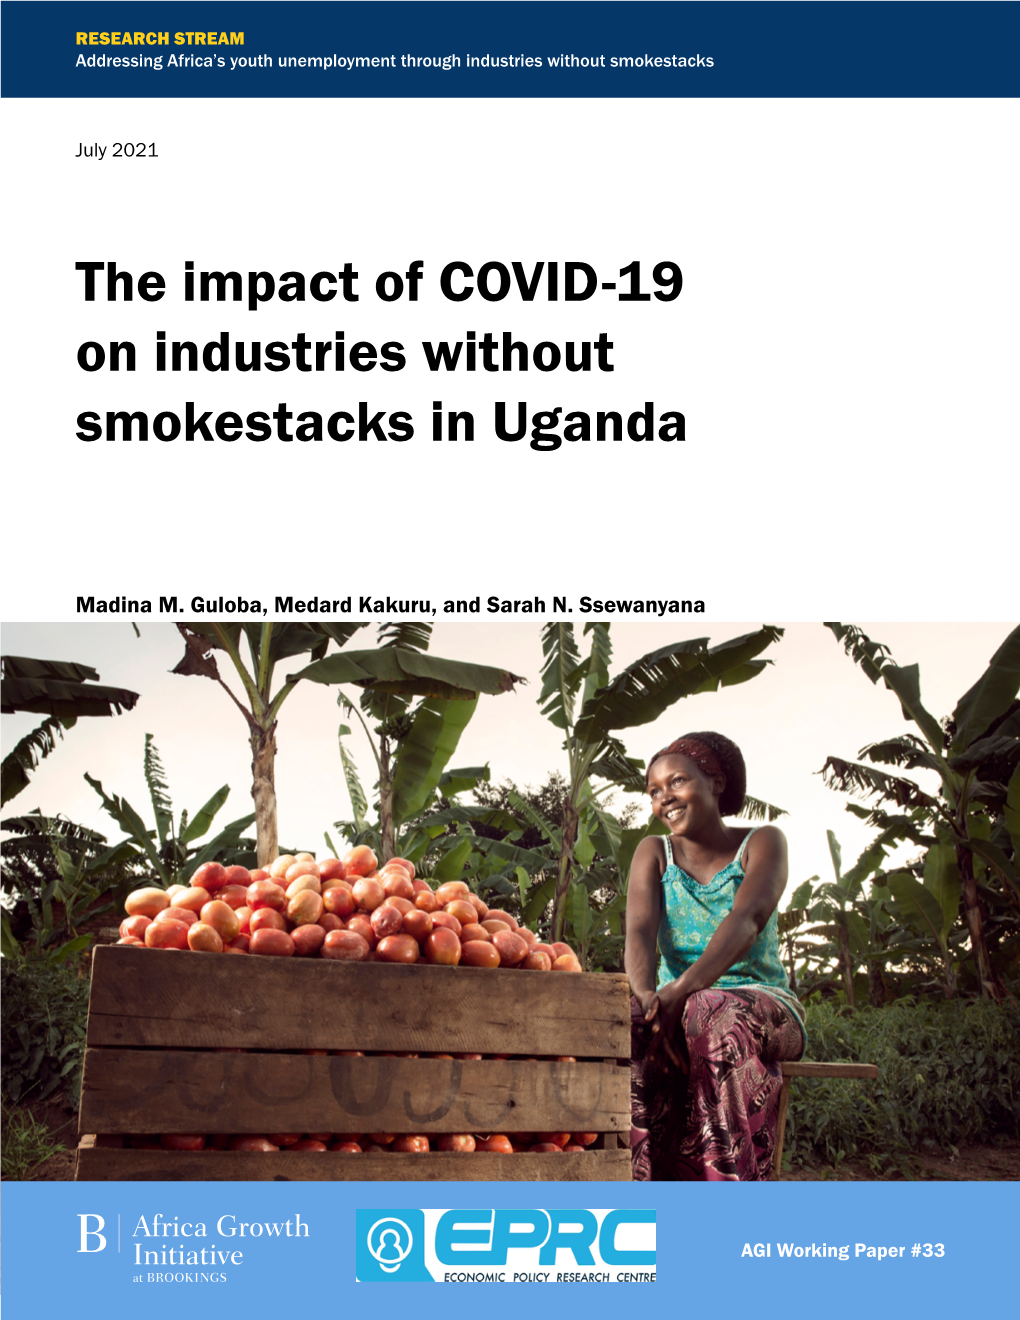 The Impact of COVID-19 on Industries Without Smokestacks in Uganda